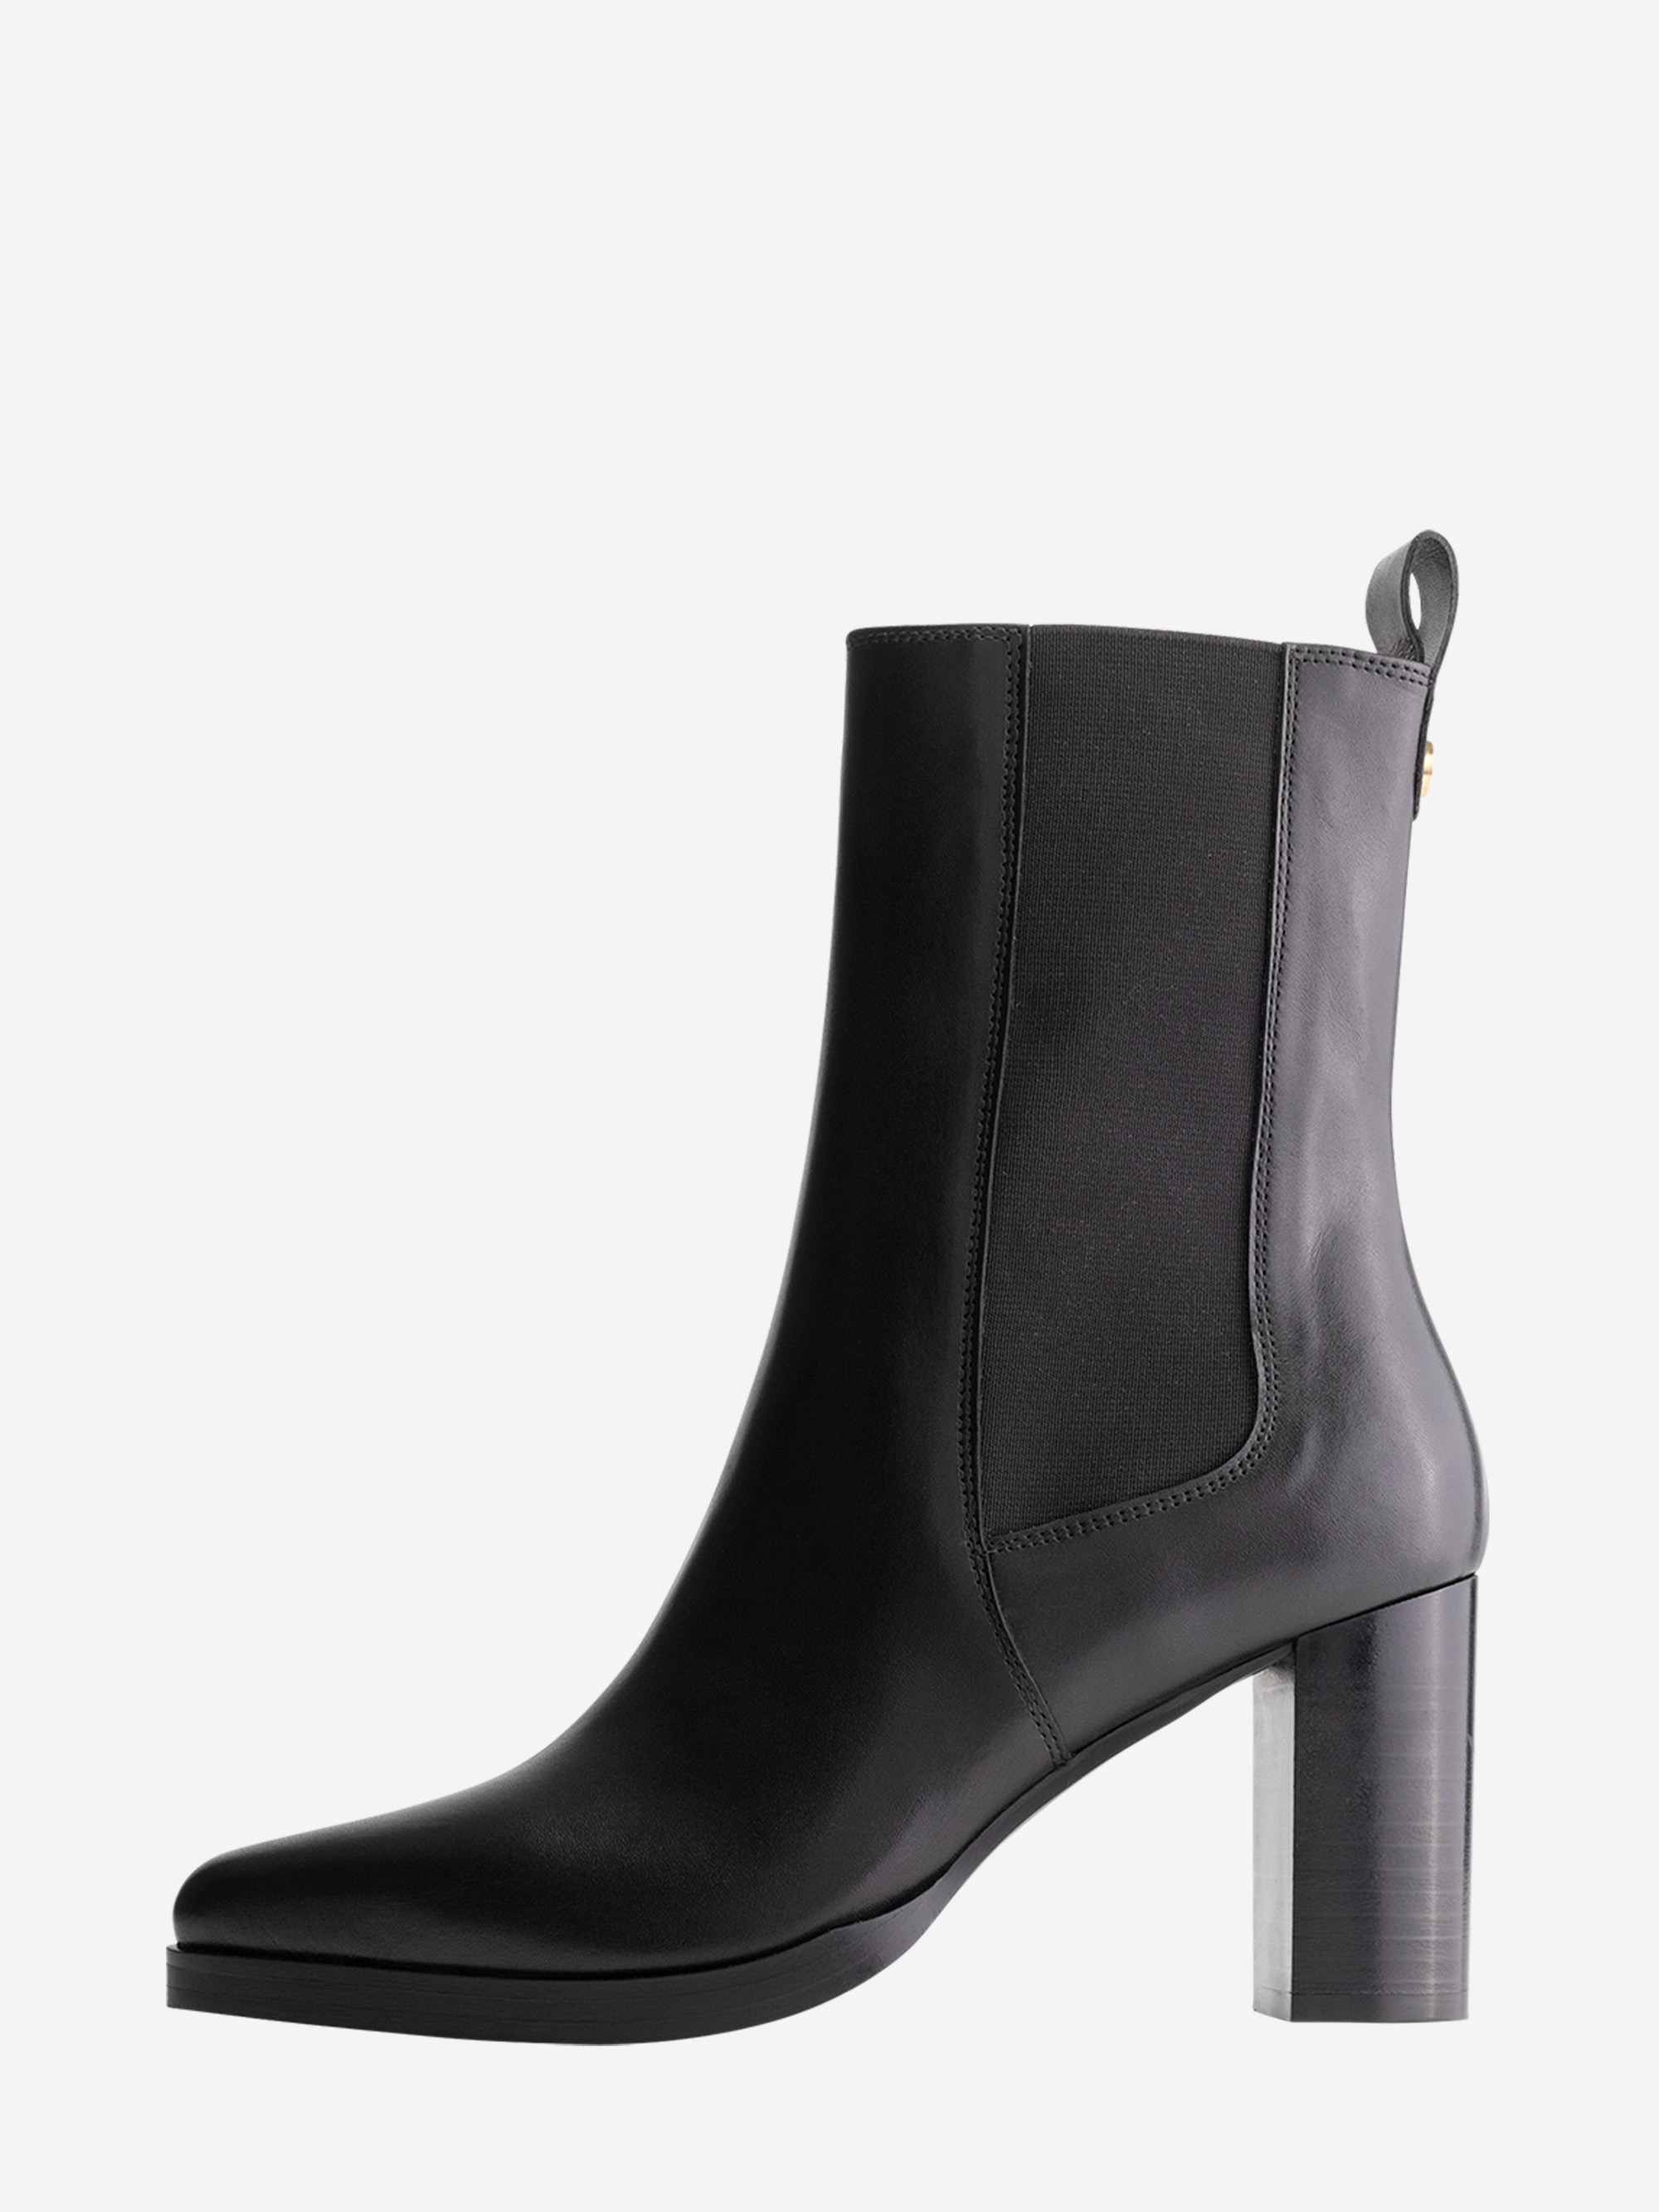 Ankle boots with high heel